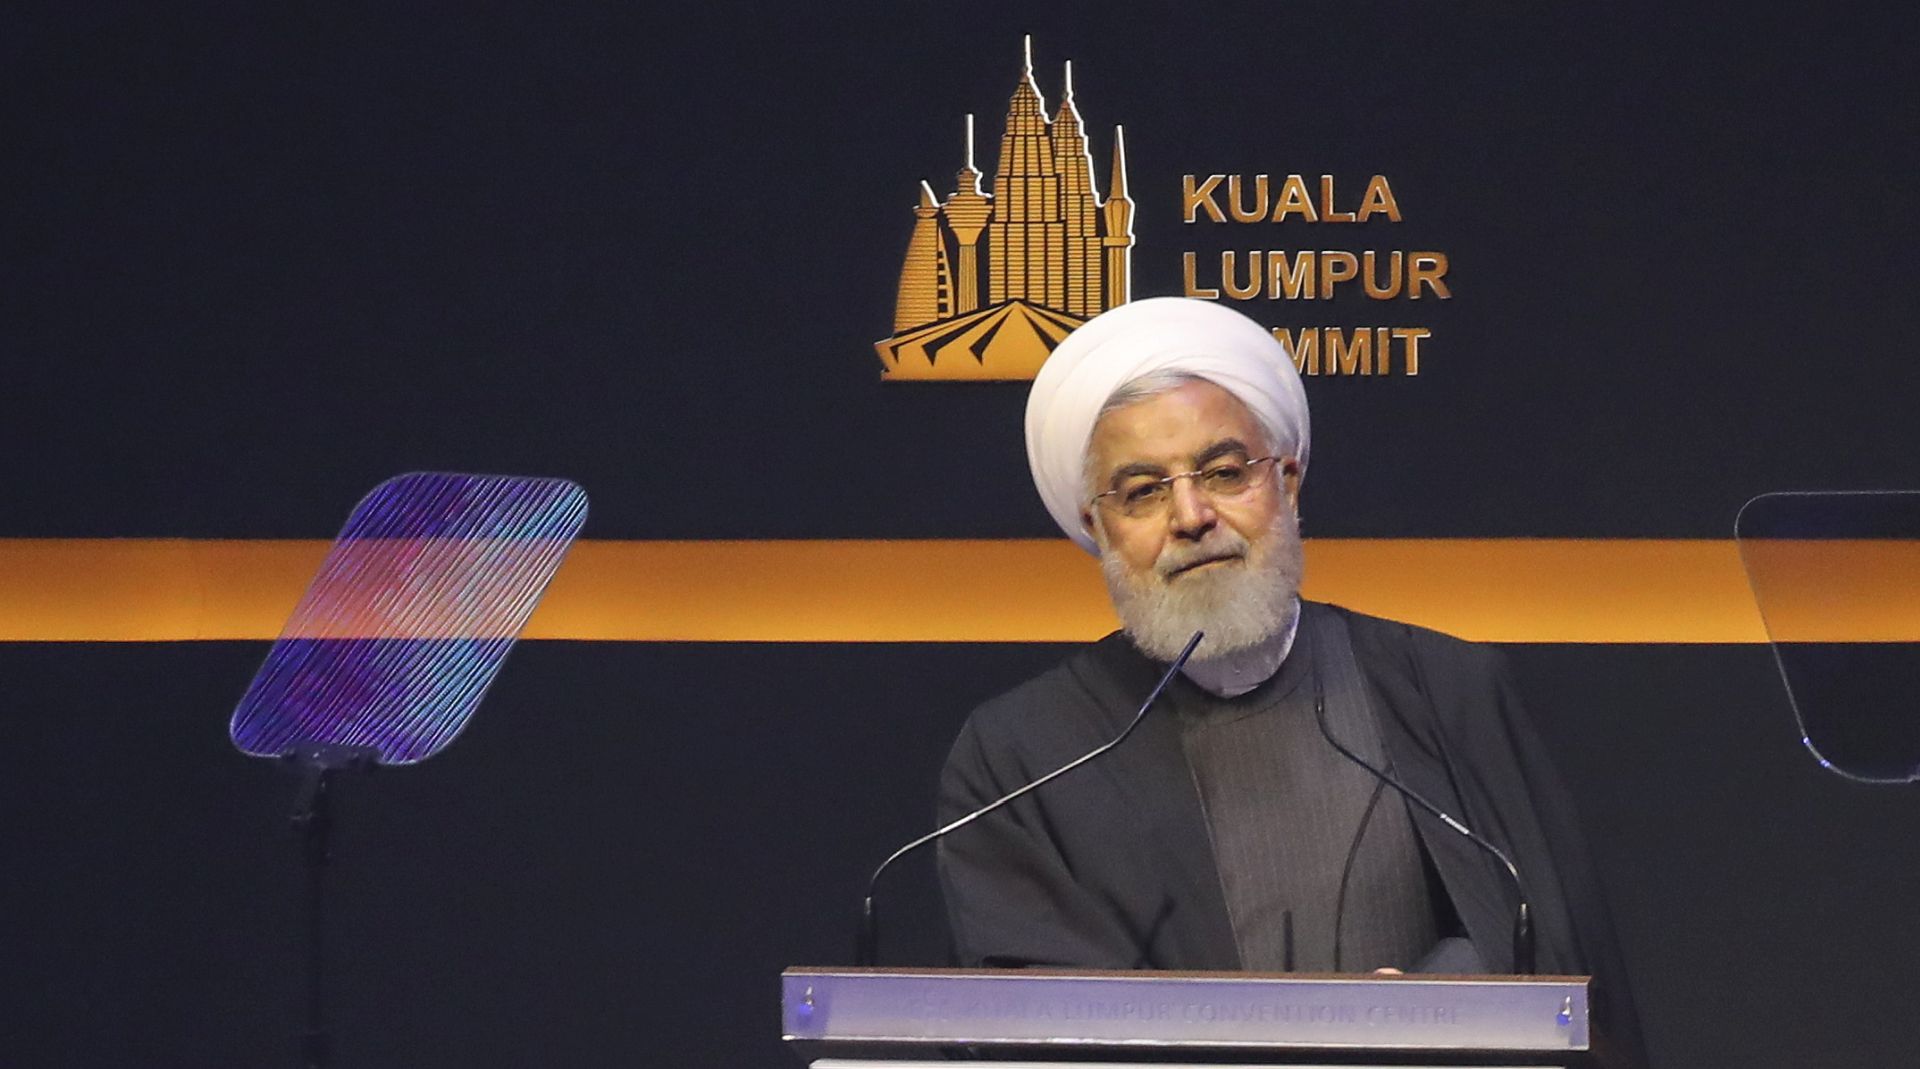 epa08081010 Iranian President Hassan Rouhani speaks at the KL Summit 2019, in Kuala Lumpur, Malaysia, 19 December 2019. The four-day gathering of leaders from the world's most-populous Muslim countries, runs from 18 through to 21 December.  EPA/FAZRY ISMAIL